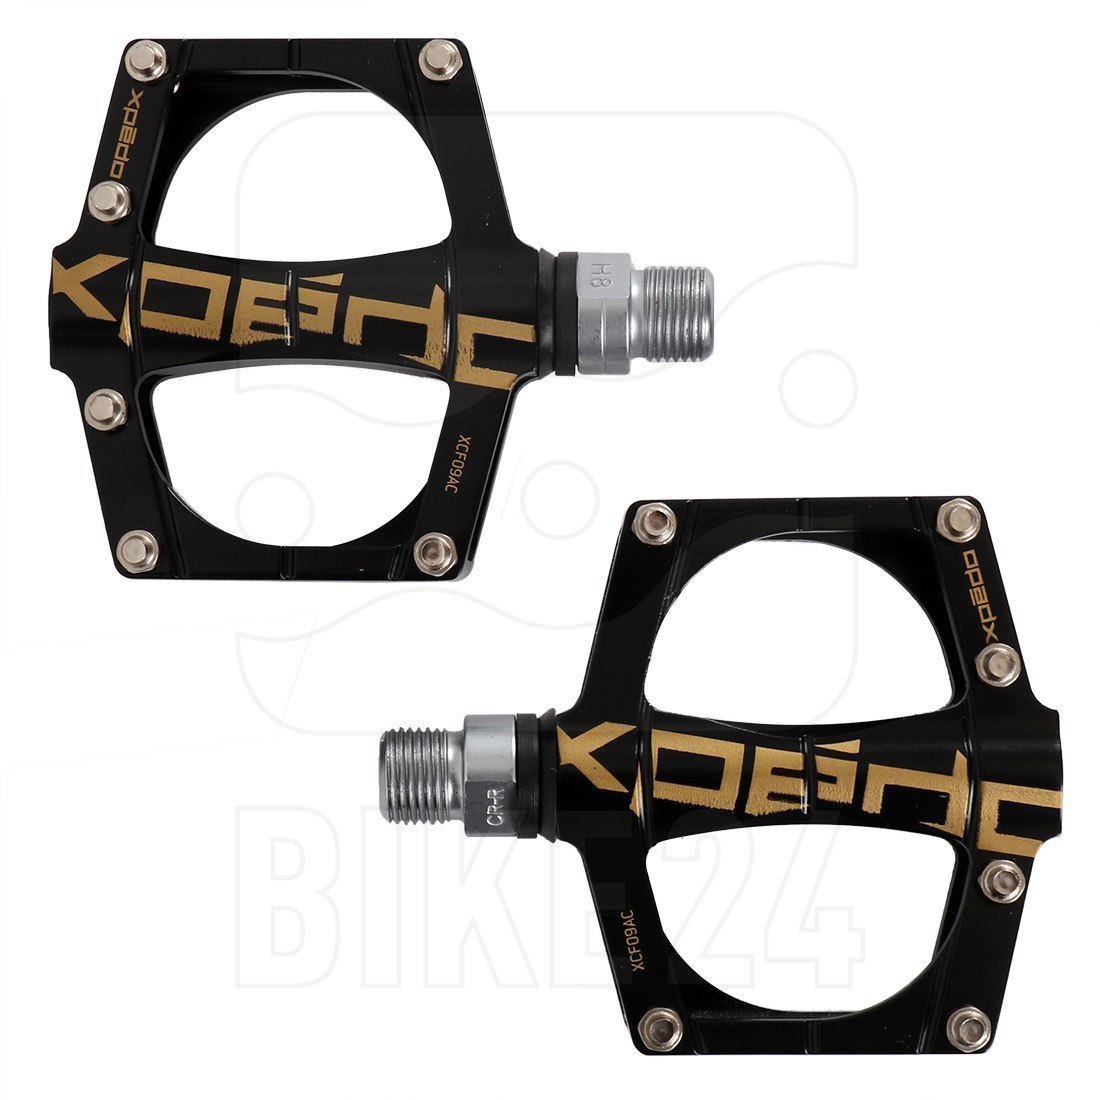 Picture of Xpedo TRVS 9 Pedals - black